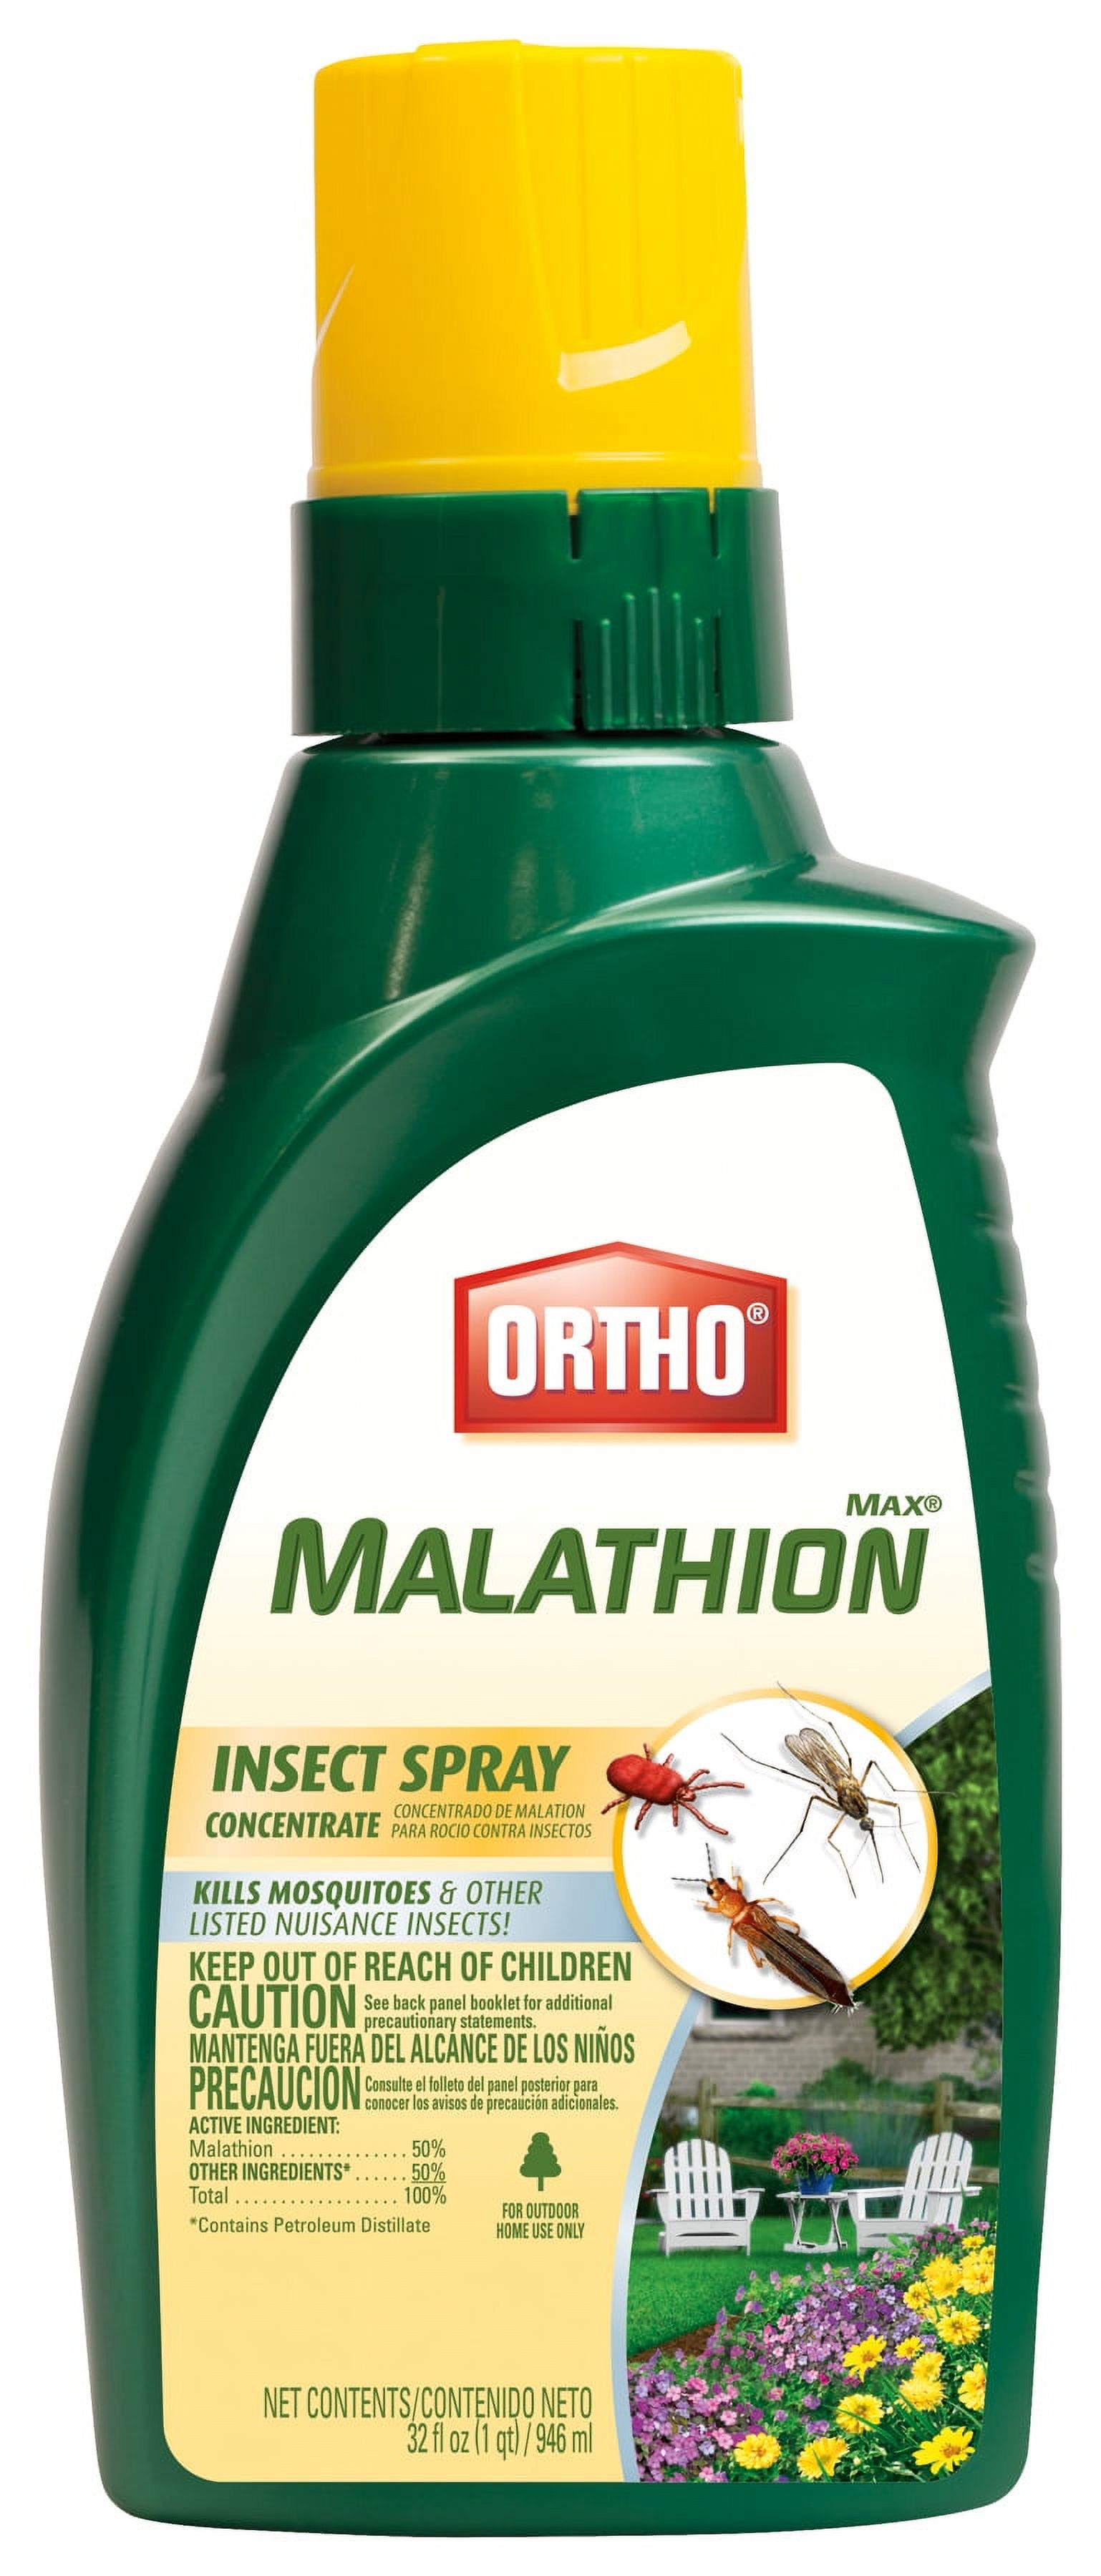 Ortho Max Malathion Insect Killer Liquid Concentrate 32 oz - image 1 of 2